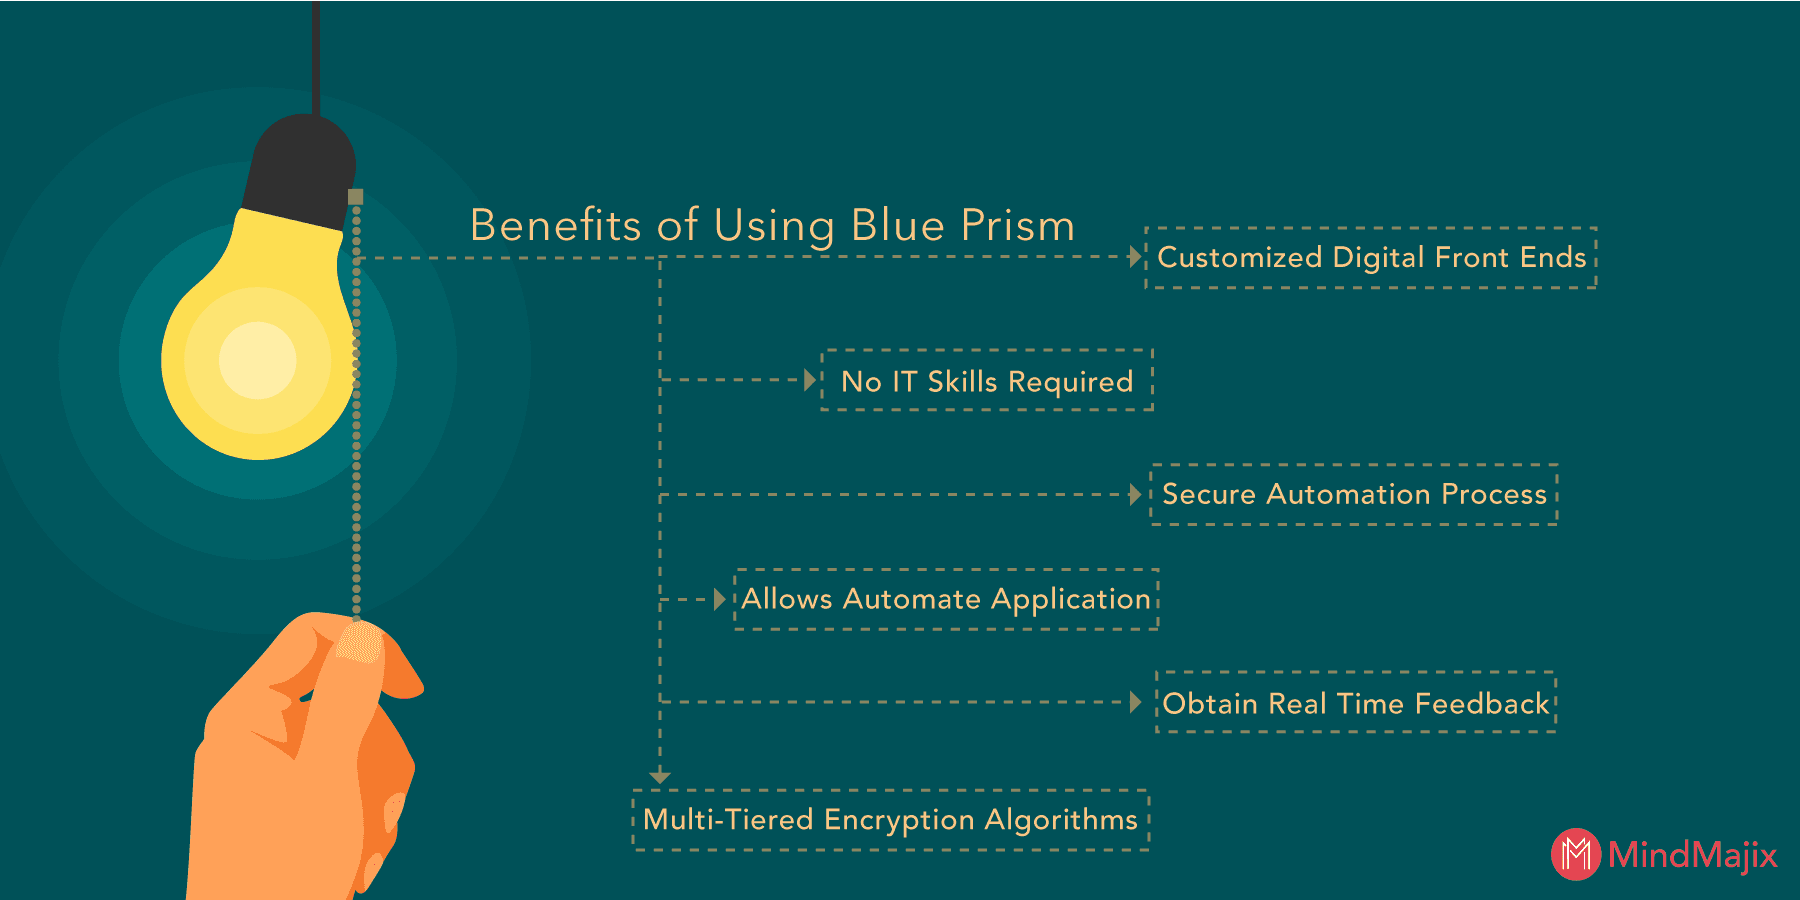 Benefits of using Blue Prism